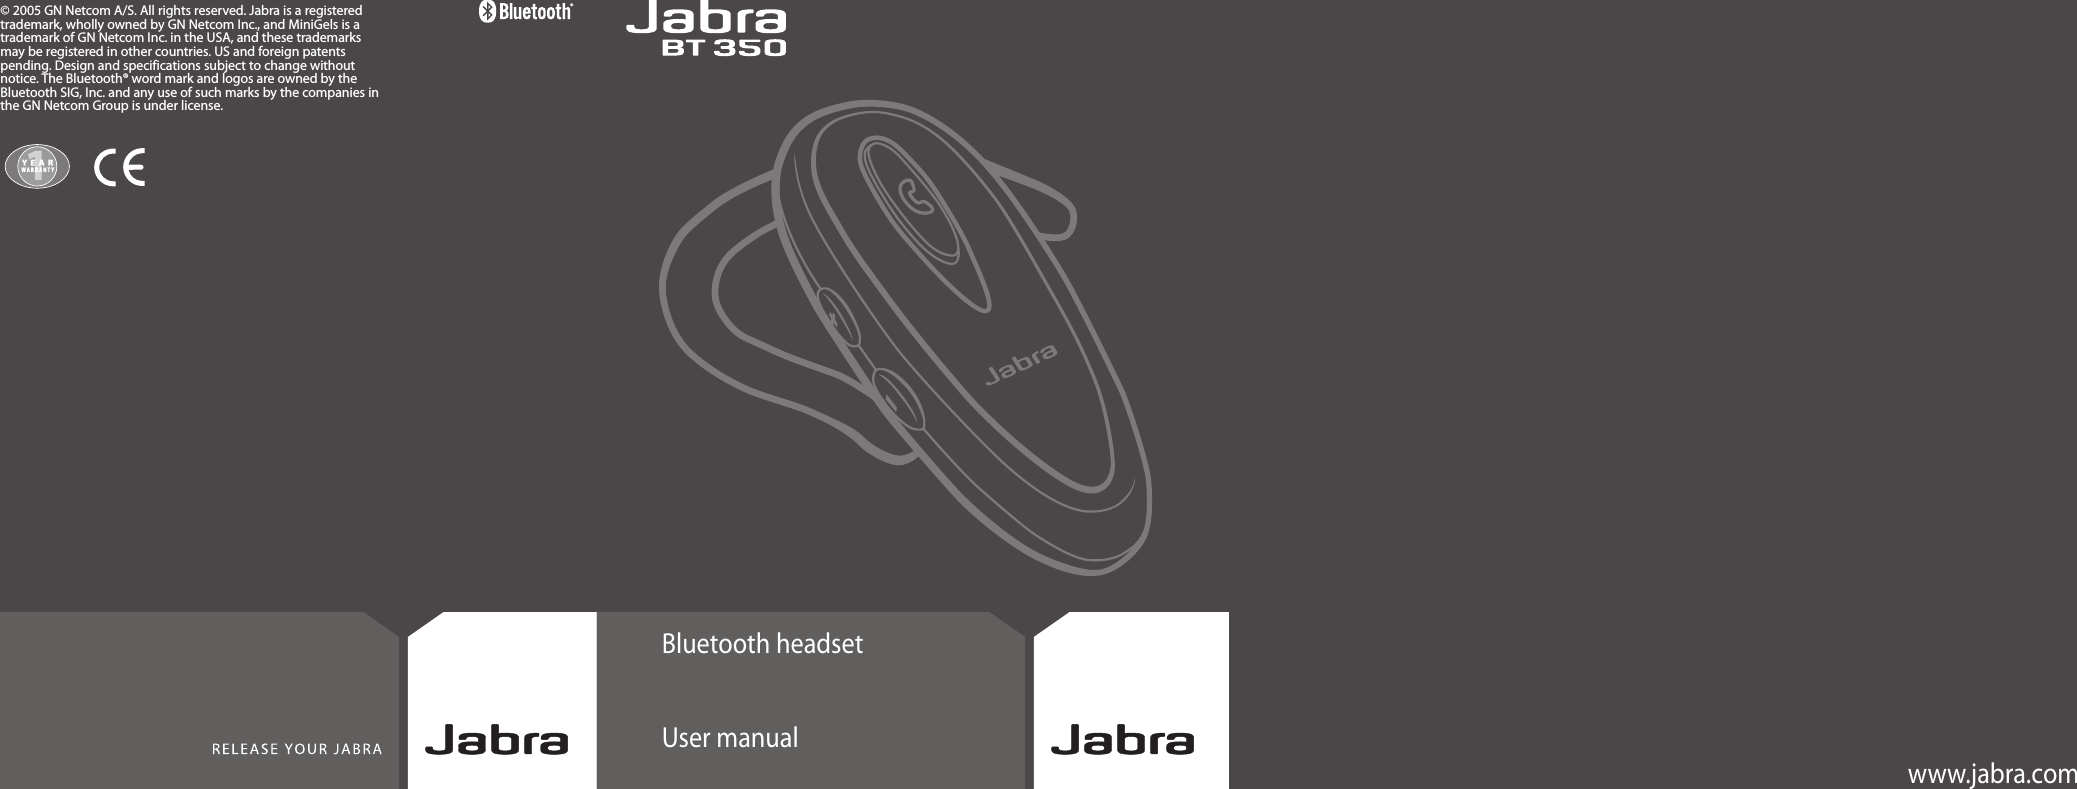 Bluetooth headsetUser manualwww.jabra.com© 2005 GN Netcom A/S. All rights reserved. Jabra is a registeredtrademark, wholly owned by GN Netcom Inc., and MiniGels is atrademark of GN Netcom Inc. in the USA, and these trademarksmay be registered in other countries. US and foreign patentspending. Design and specifications subject to change withoutnotice. The Bluetooth® word mark and logos are owned by theBluetooth SIG, Inc. and any use of such marks by the companies inthe GN Netcom Group is under license.